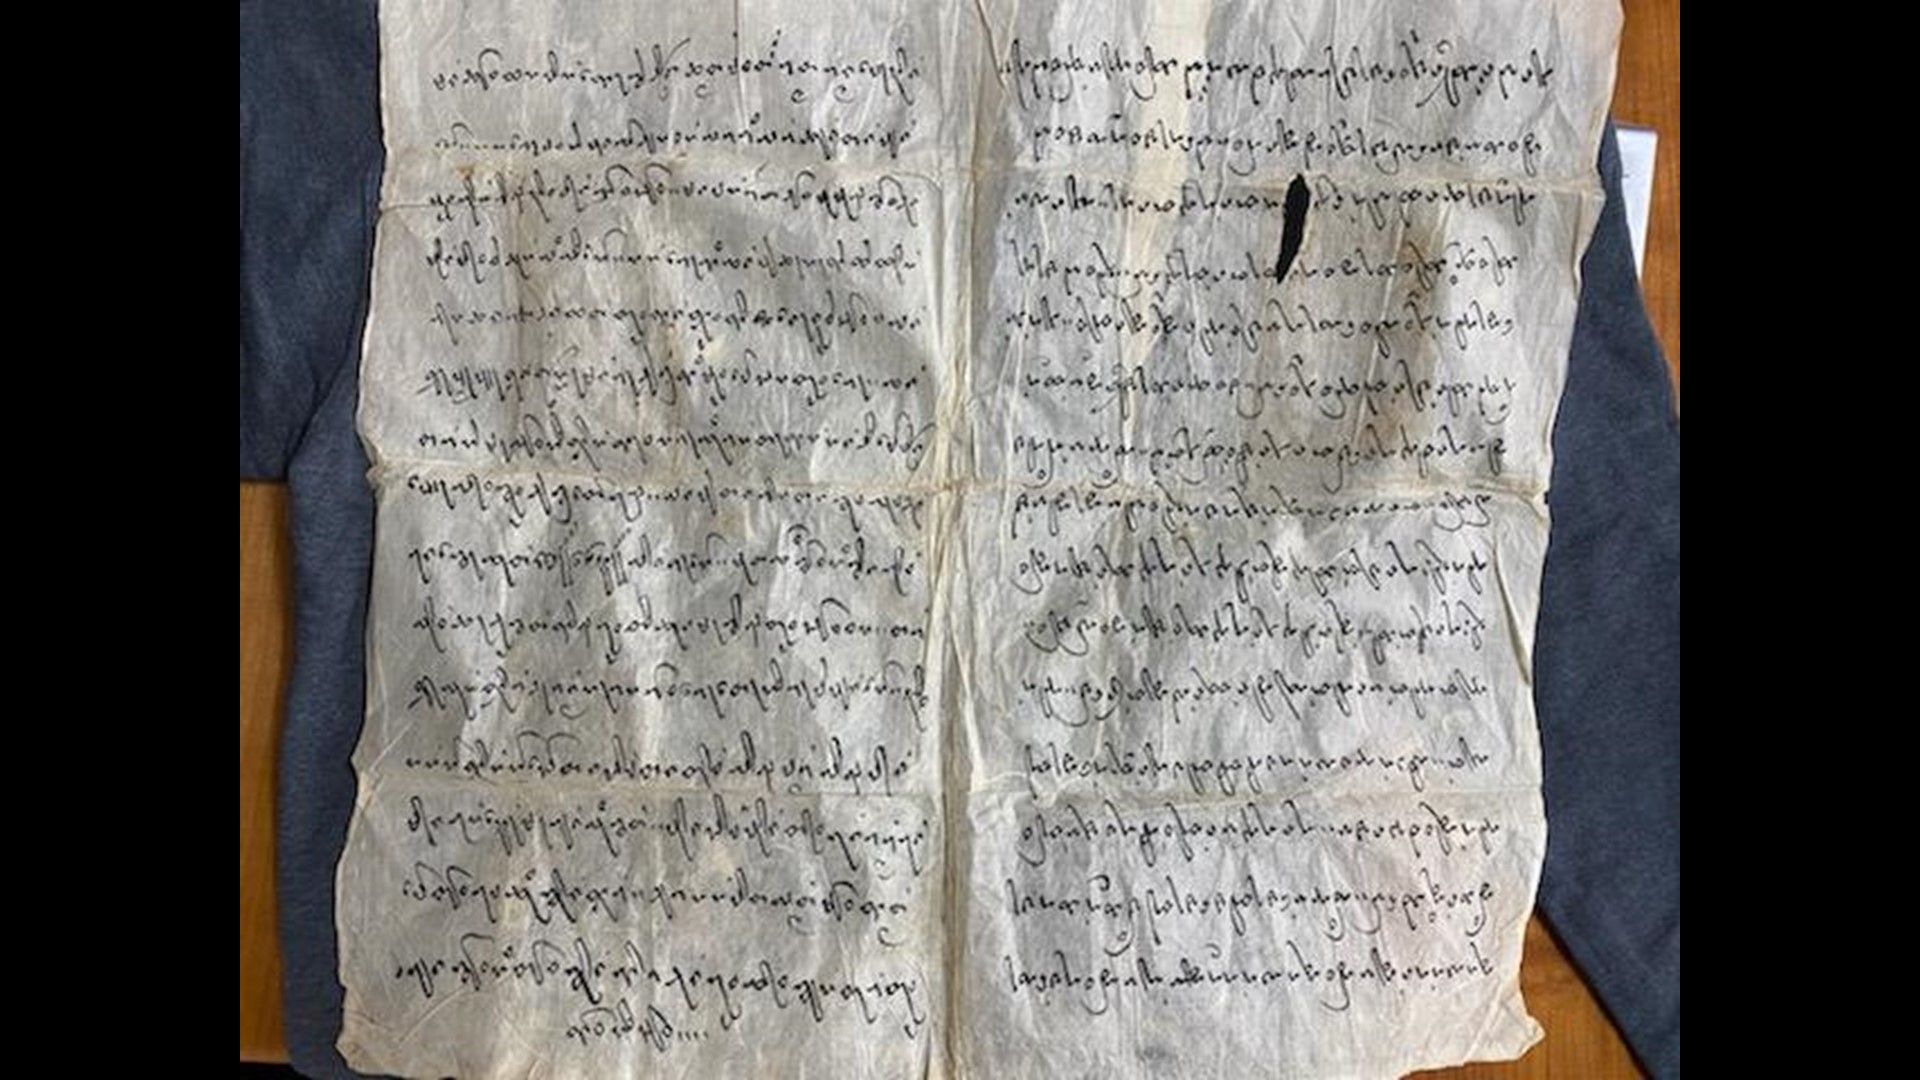 A woman from Wayne County is hoping to solve the mystery behind an old letter in a foreign language passed down to her.